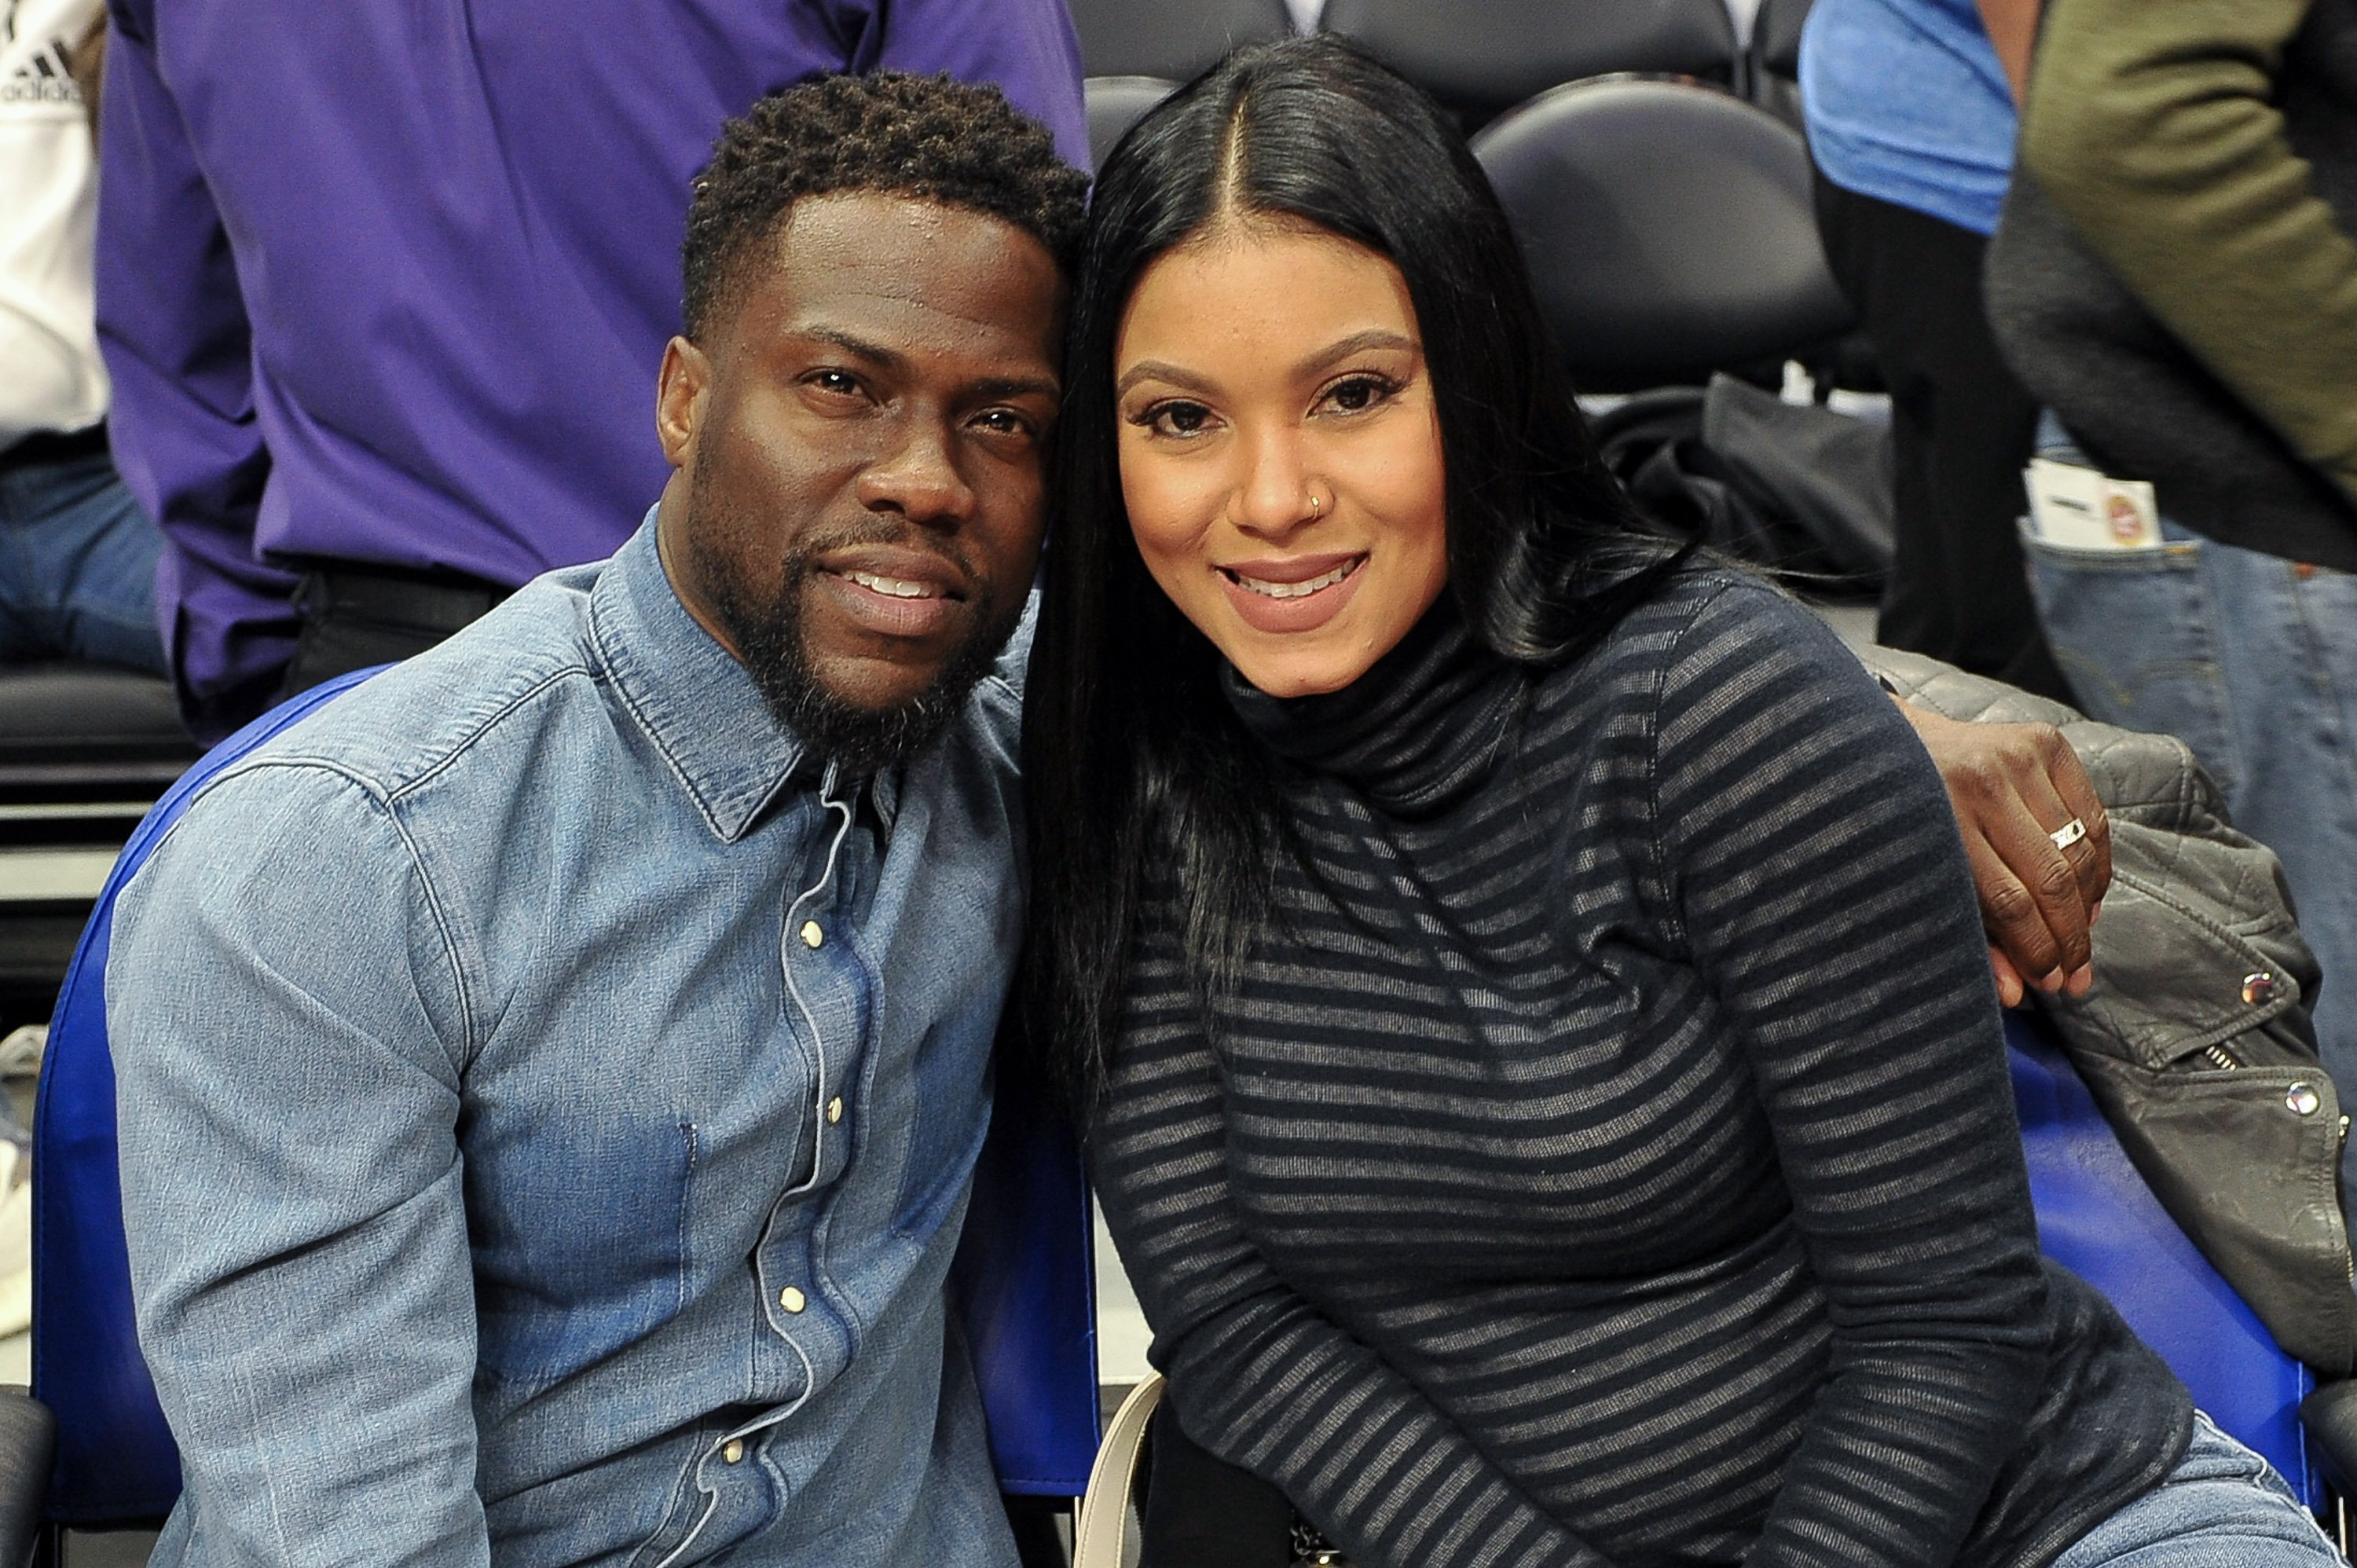 Kevin Hart with current wife, Eniko Parrish at an NBA game in Los Angeles in January 2018. | Photo: Getty Images